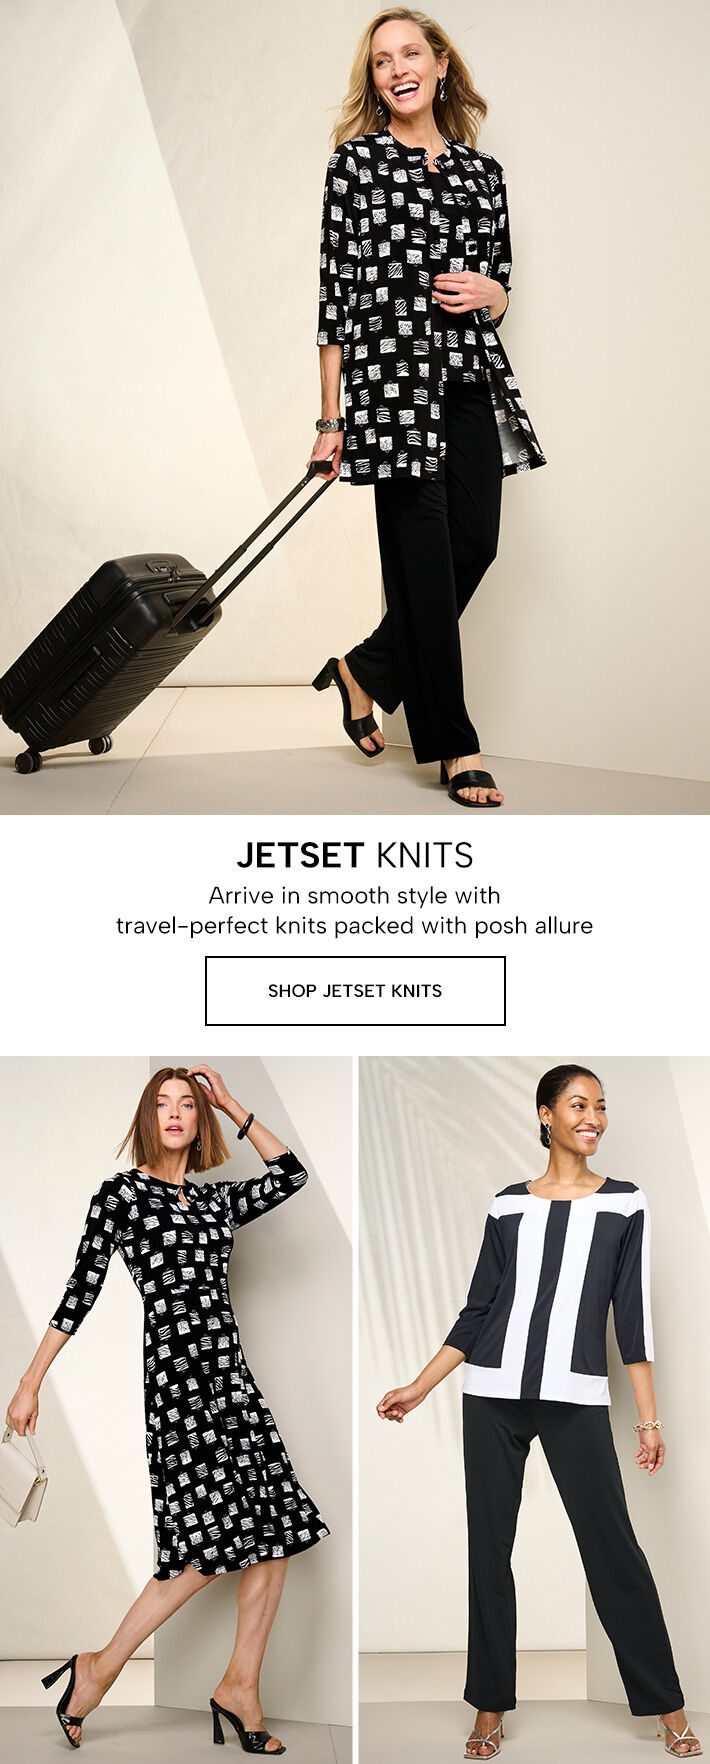 Jetset Knits - arrive in smooth style with travel-perfect knits packed with posh allure.